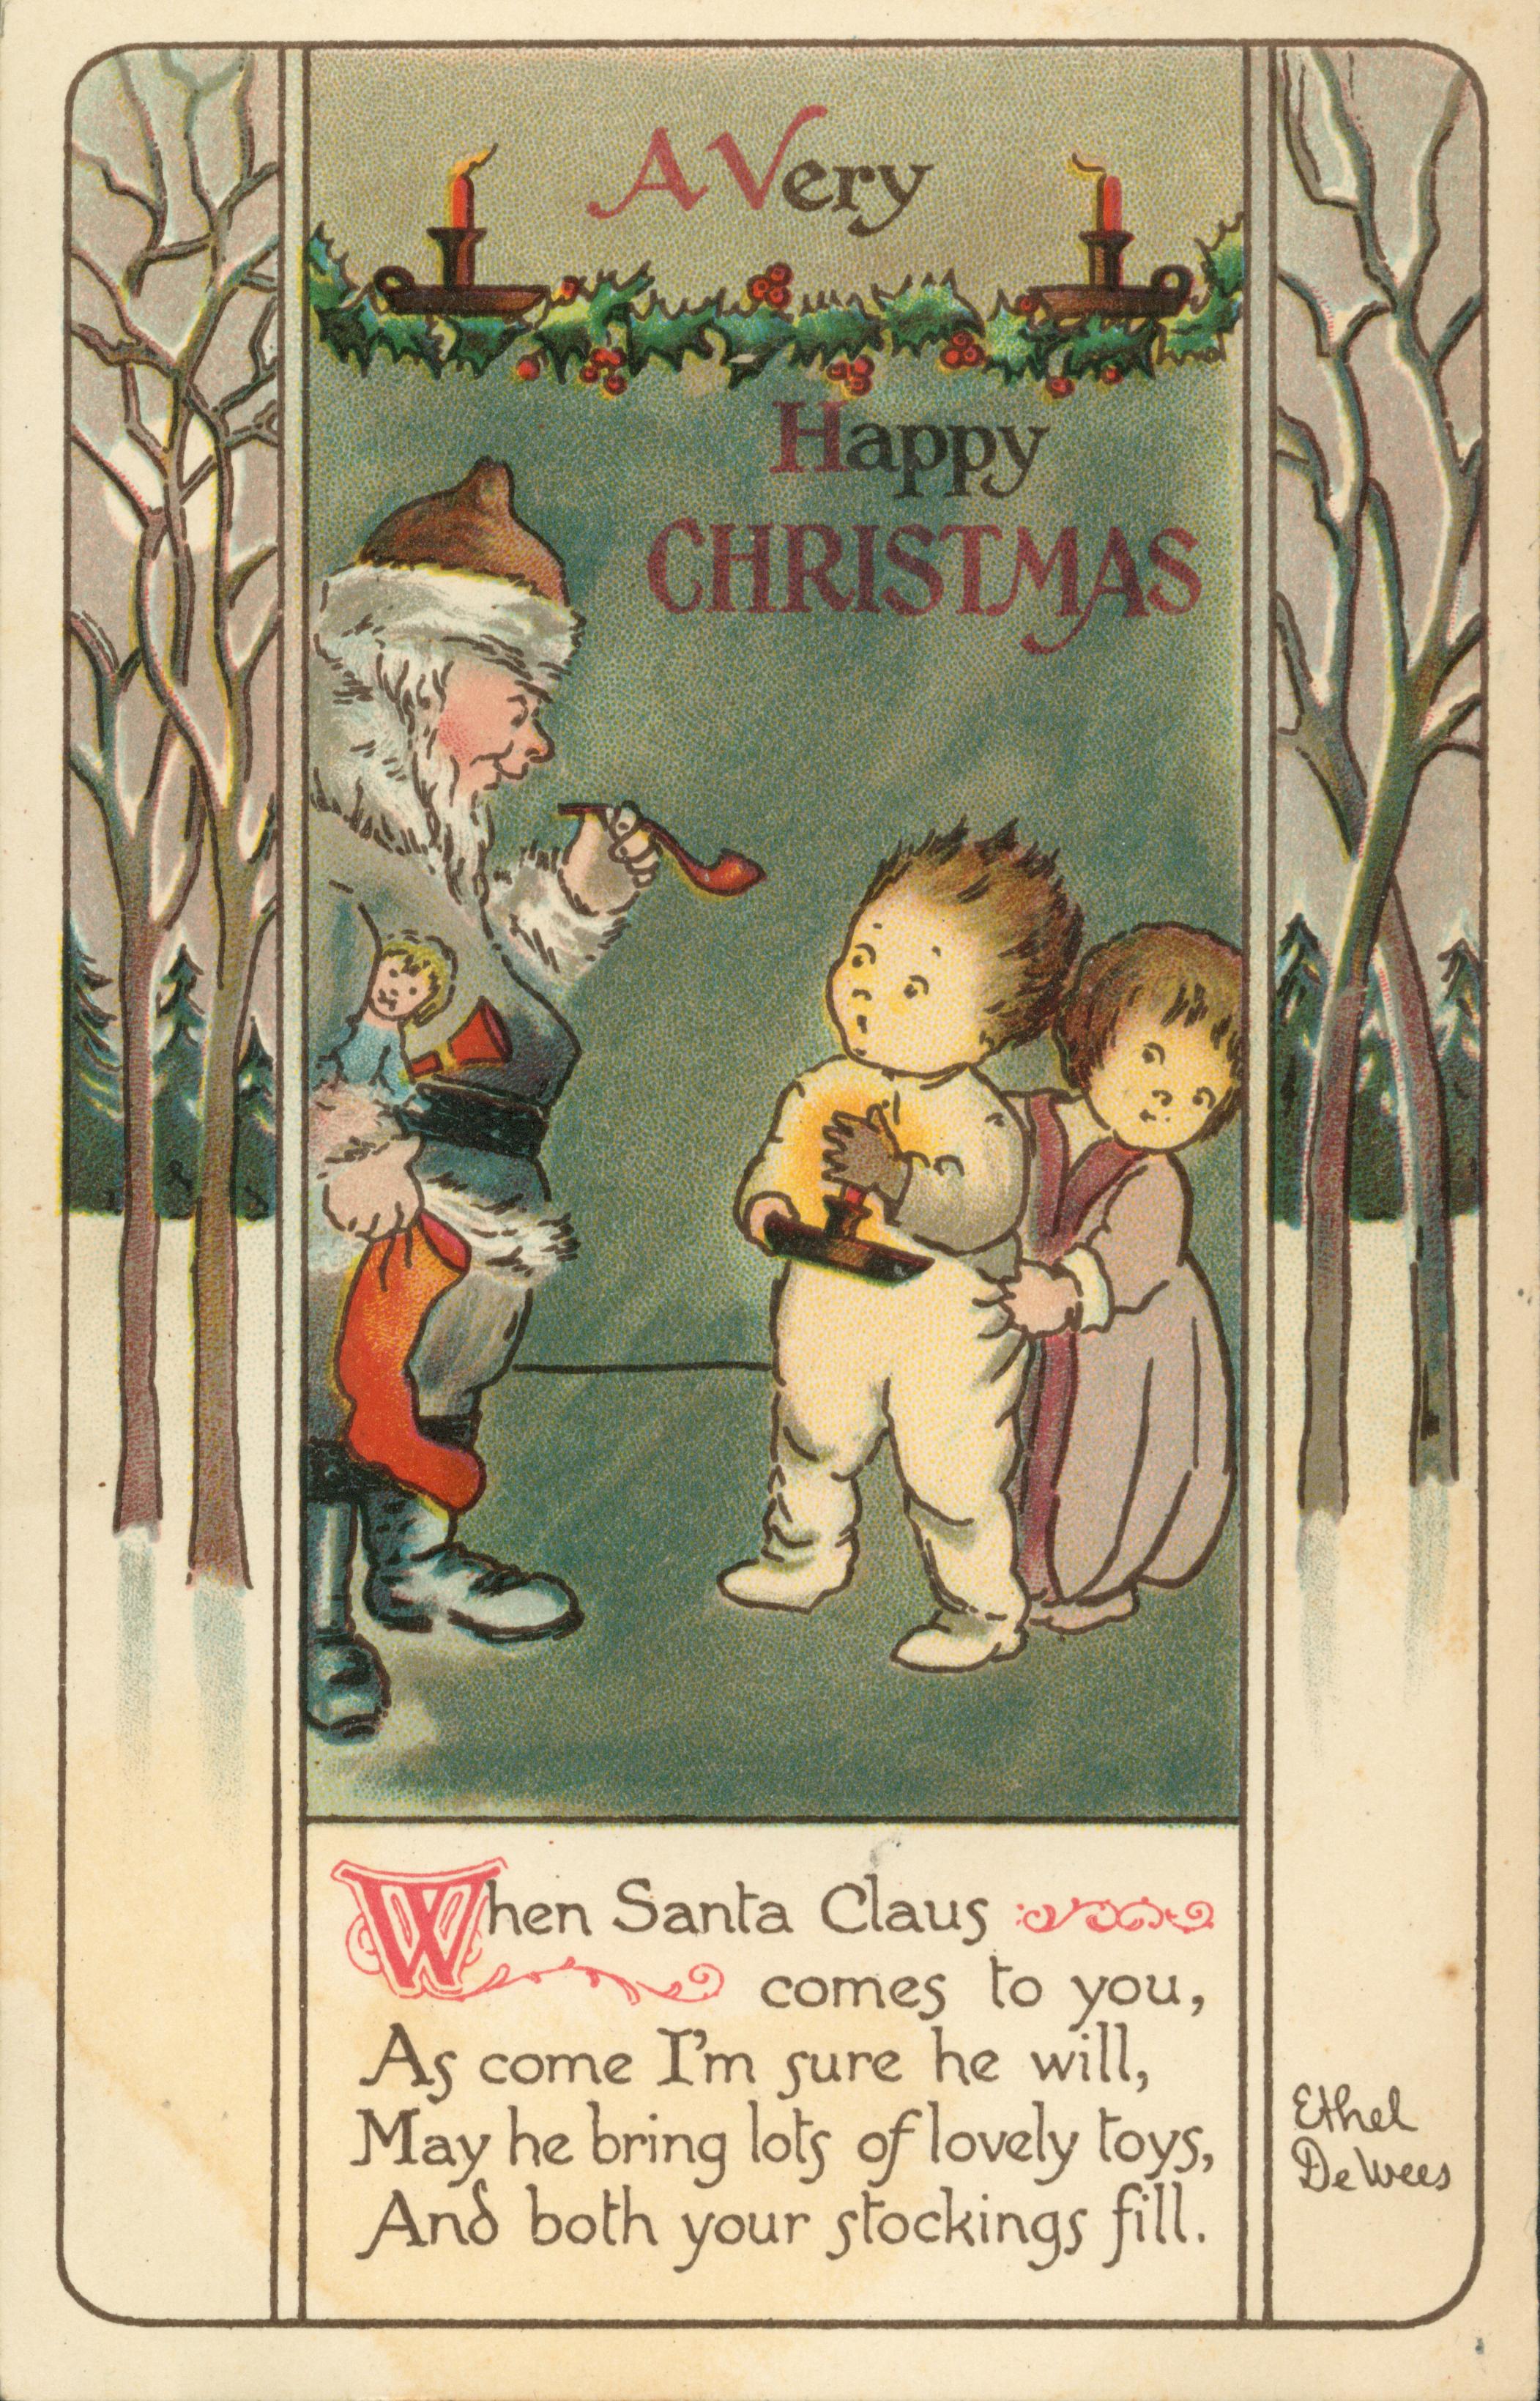 Shows Santa holding a pipe in an encounter with two children